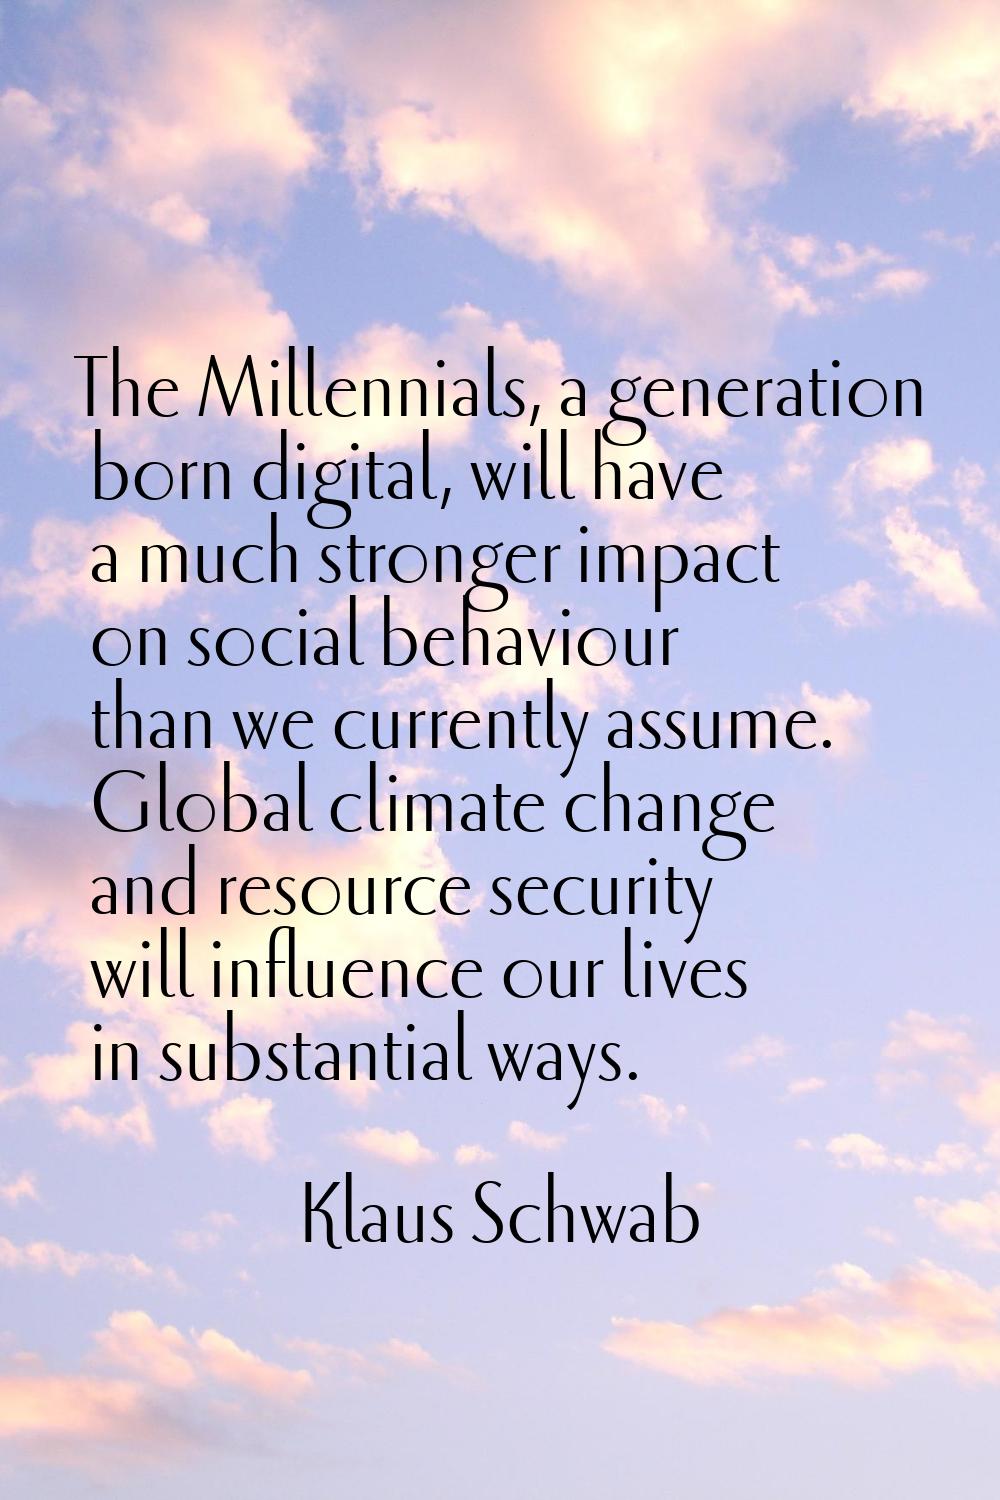 The Millennials, a generation born digital, will have a much stronger impact on social behaviour th